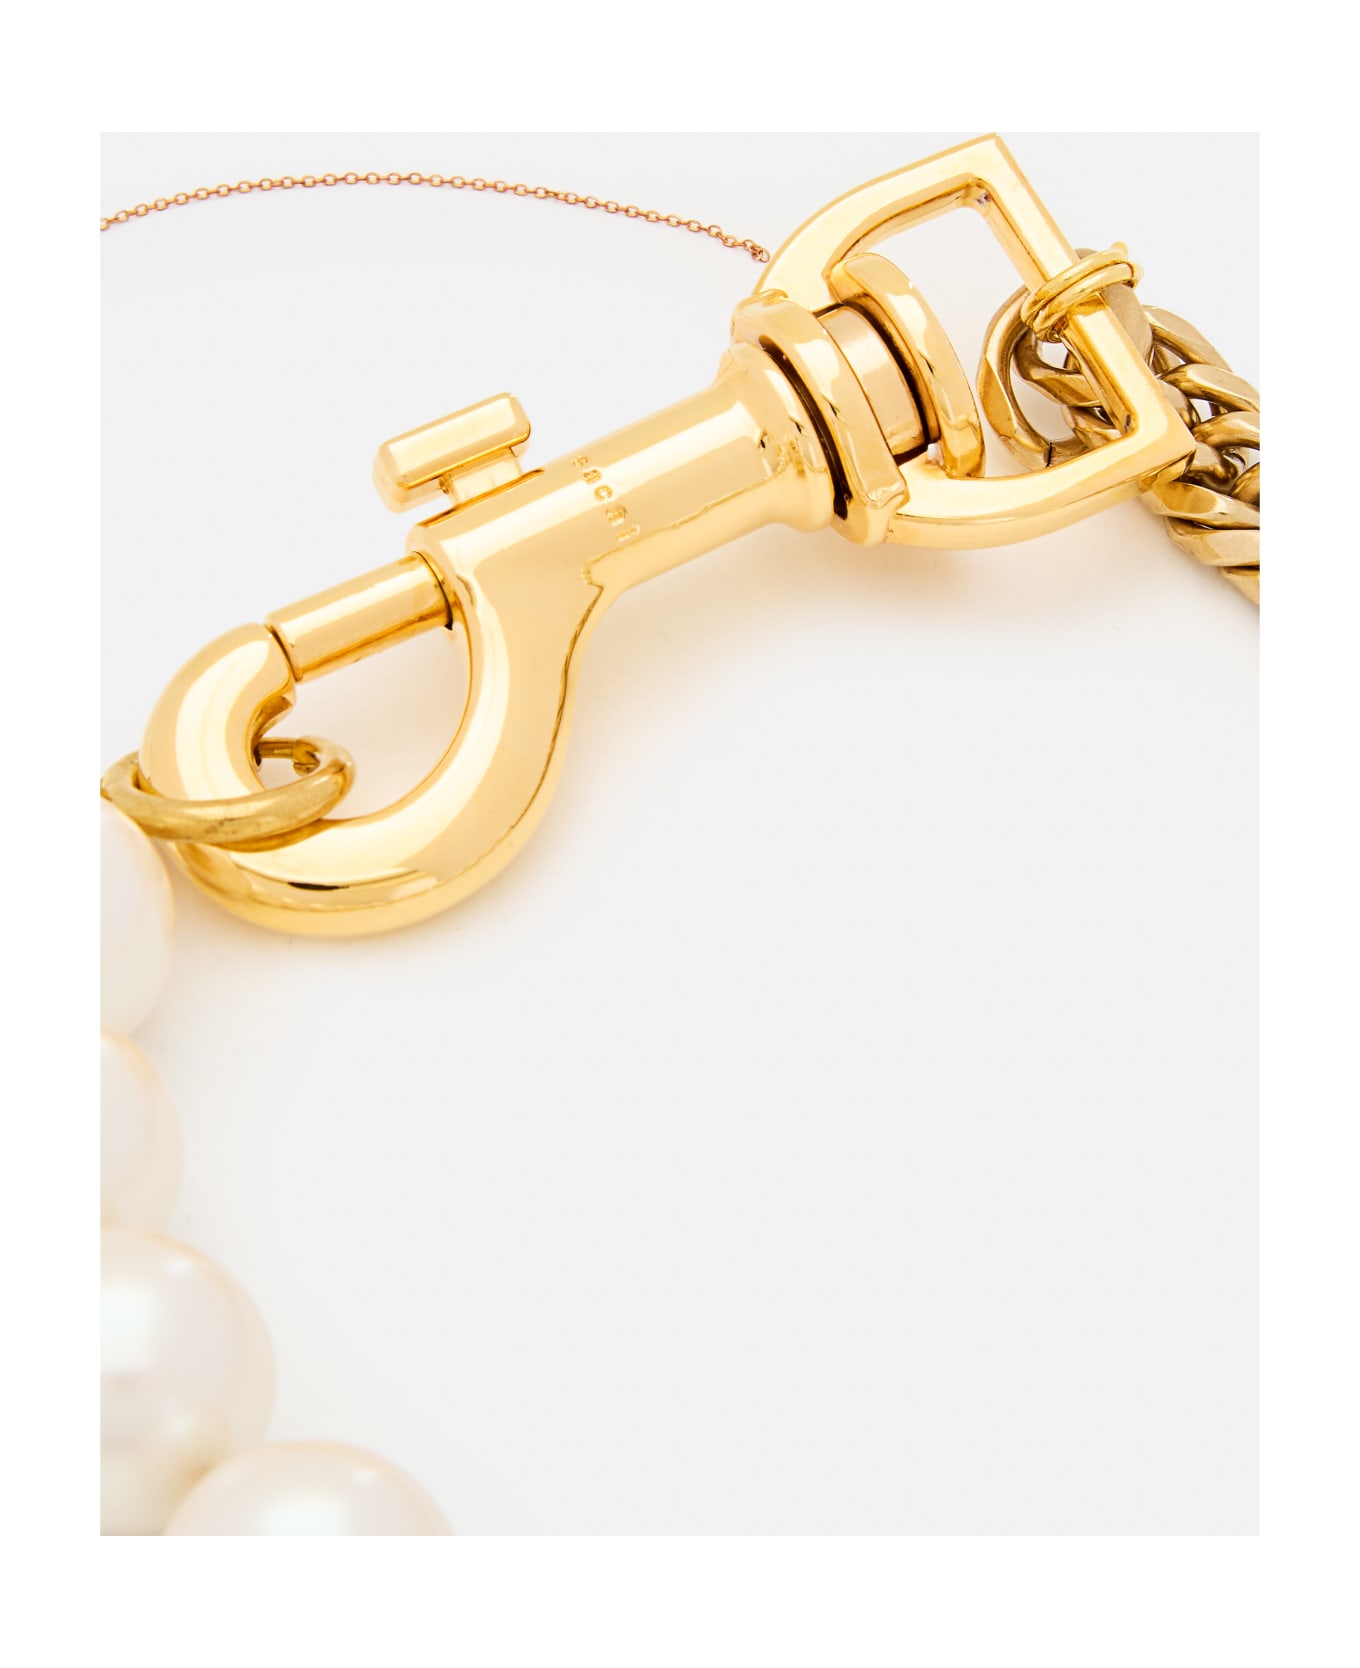 Sacai Pearl Chain Short Necklace - Golden ネックレス